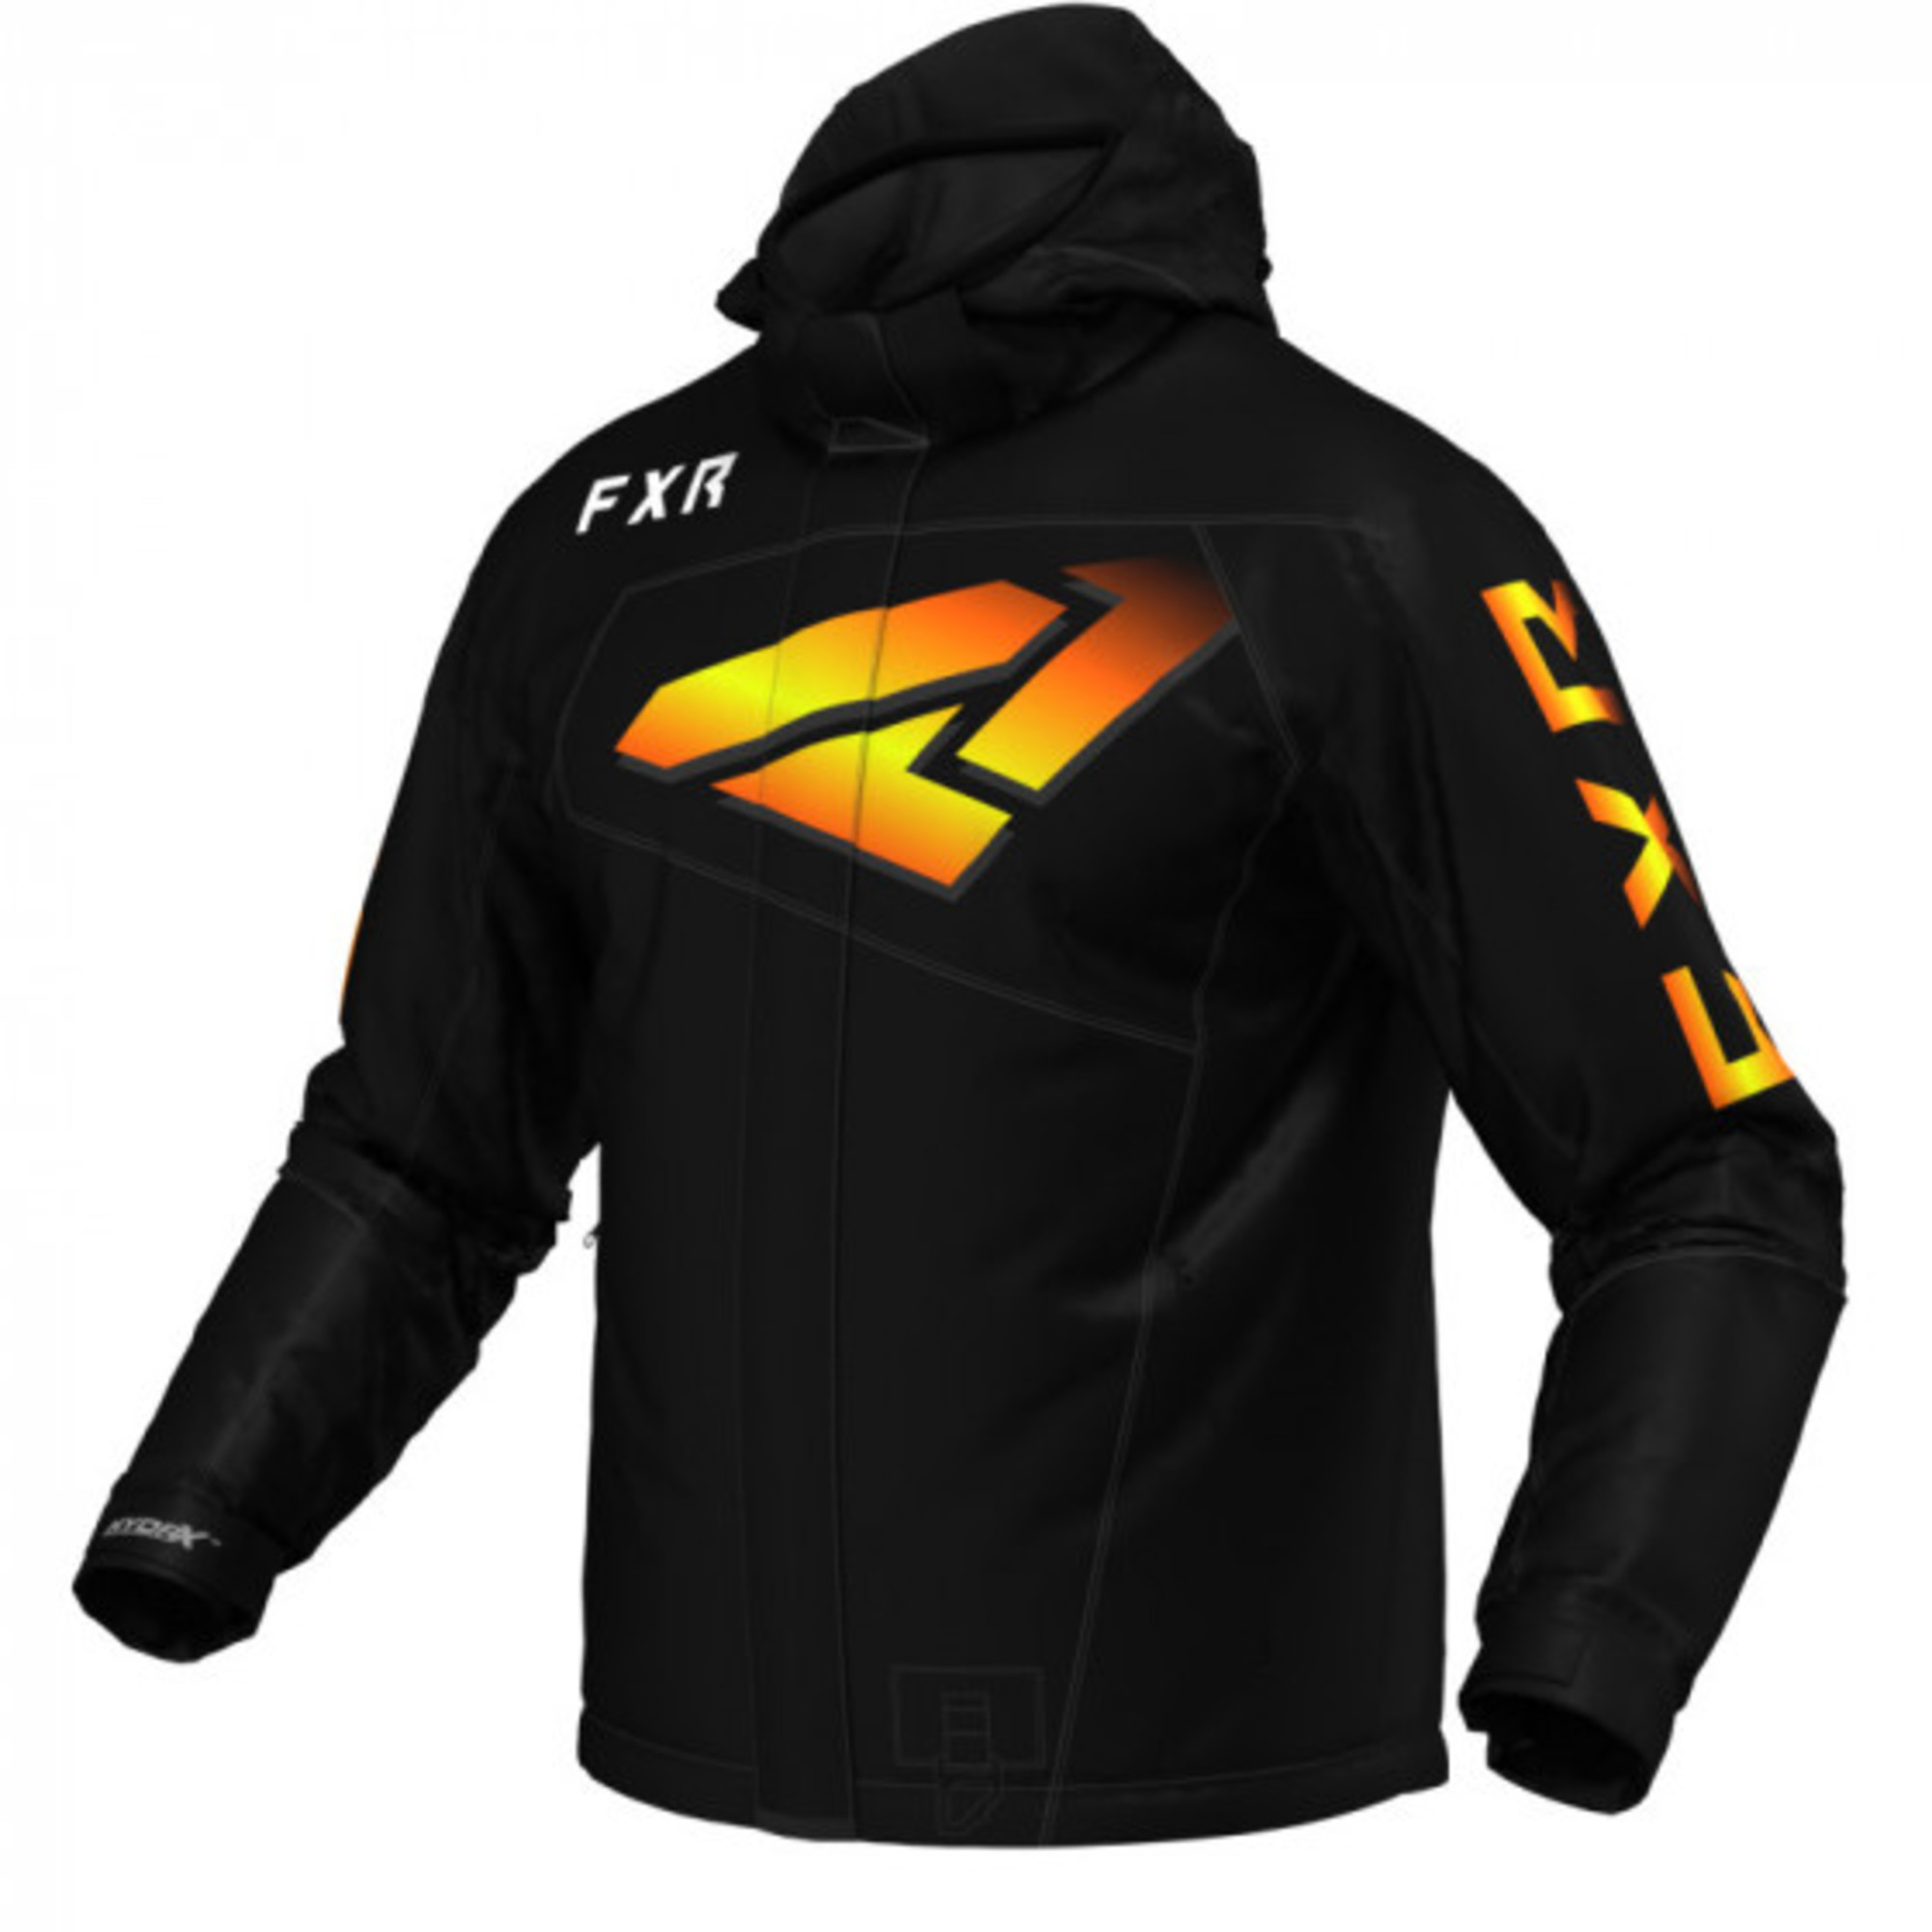 fxr racing insulated jackets for men fuel limited edition fast